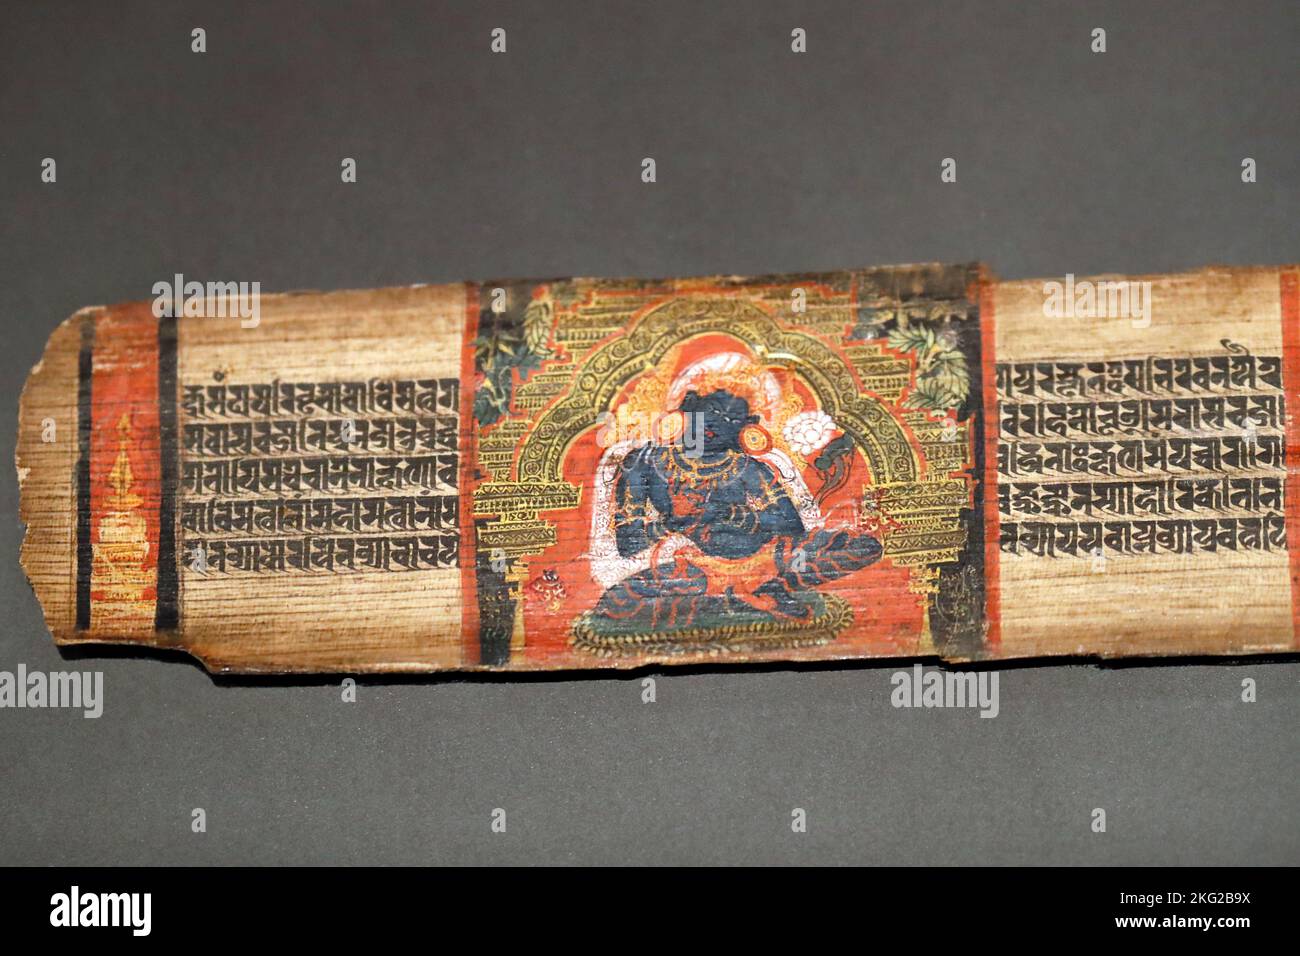 Louvre Abu Dhabi art and civilisation museum. The sutra of the Perfection of Wsdom, Buddhist ext. Pal dynasty, India 1191. United Arab Emirates. Stock Photo